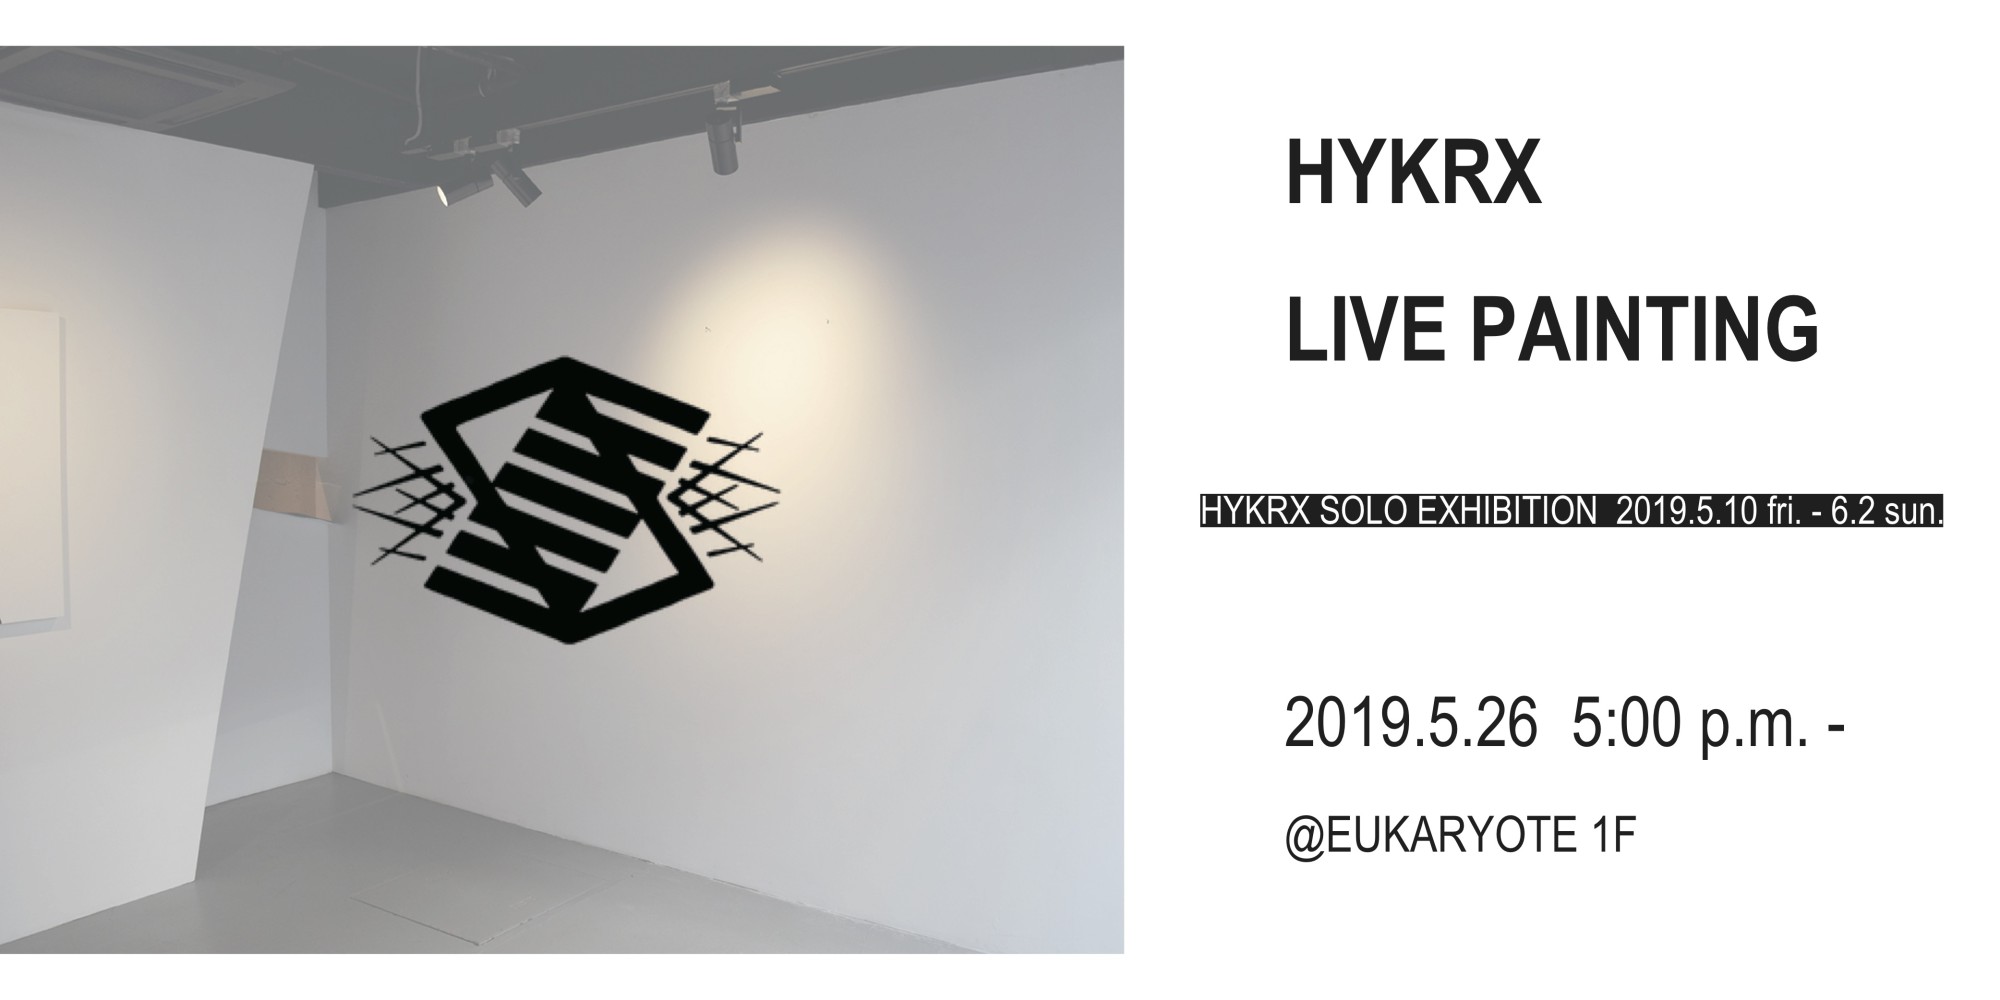 HYKRX LIVE PAINTING